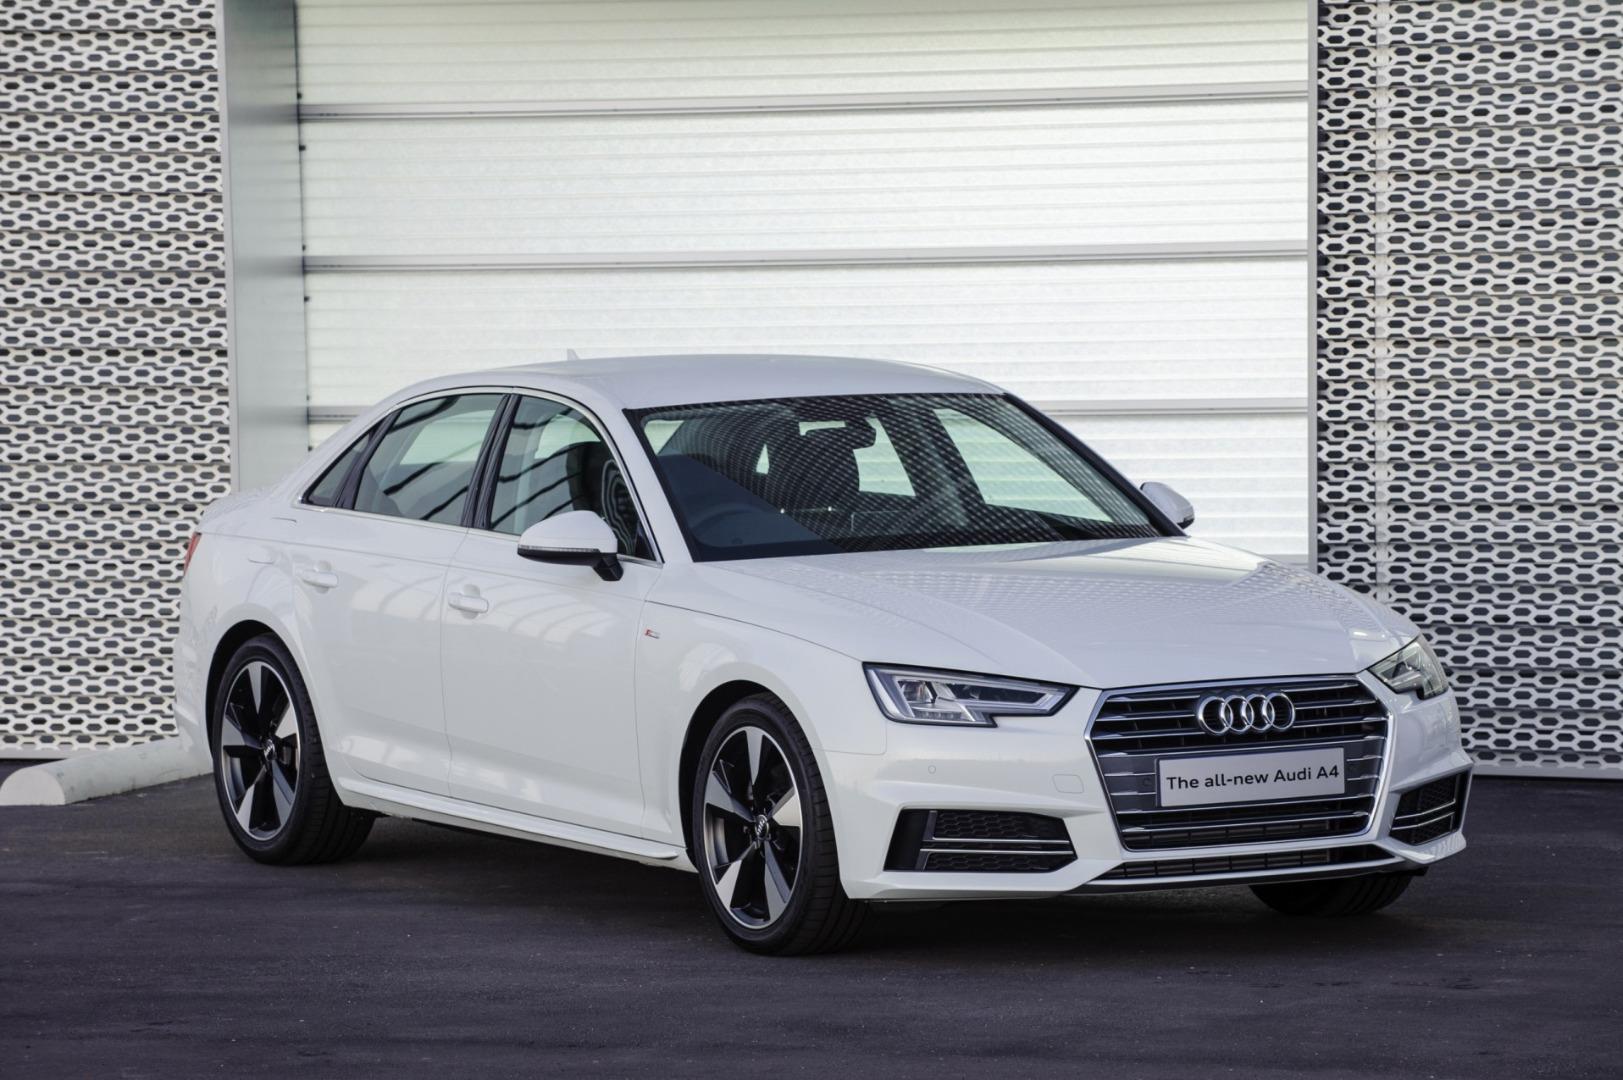 which audi a4 is better: petrol or diesel?